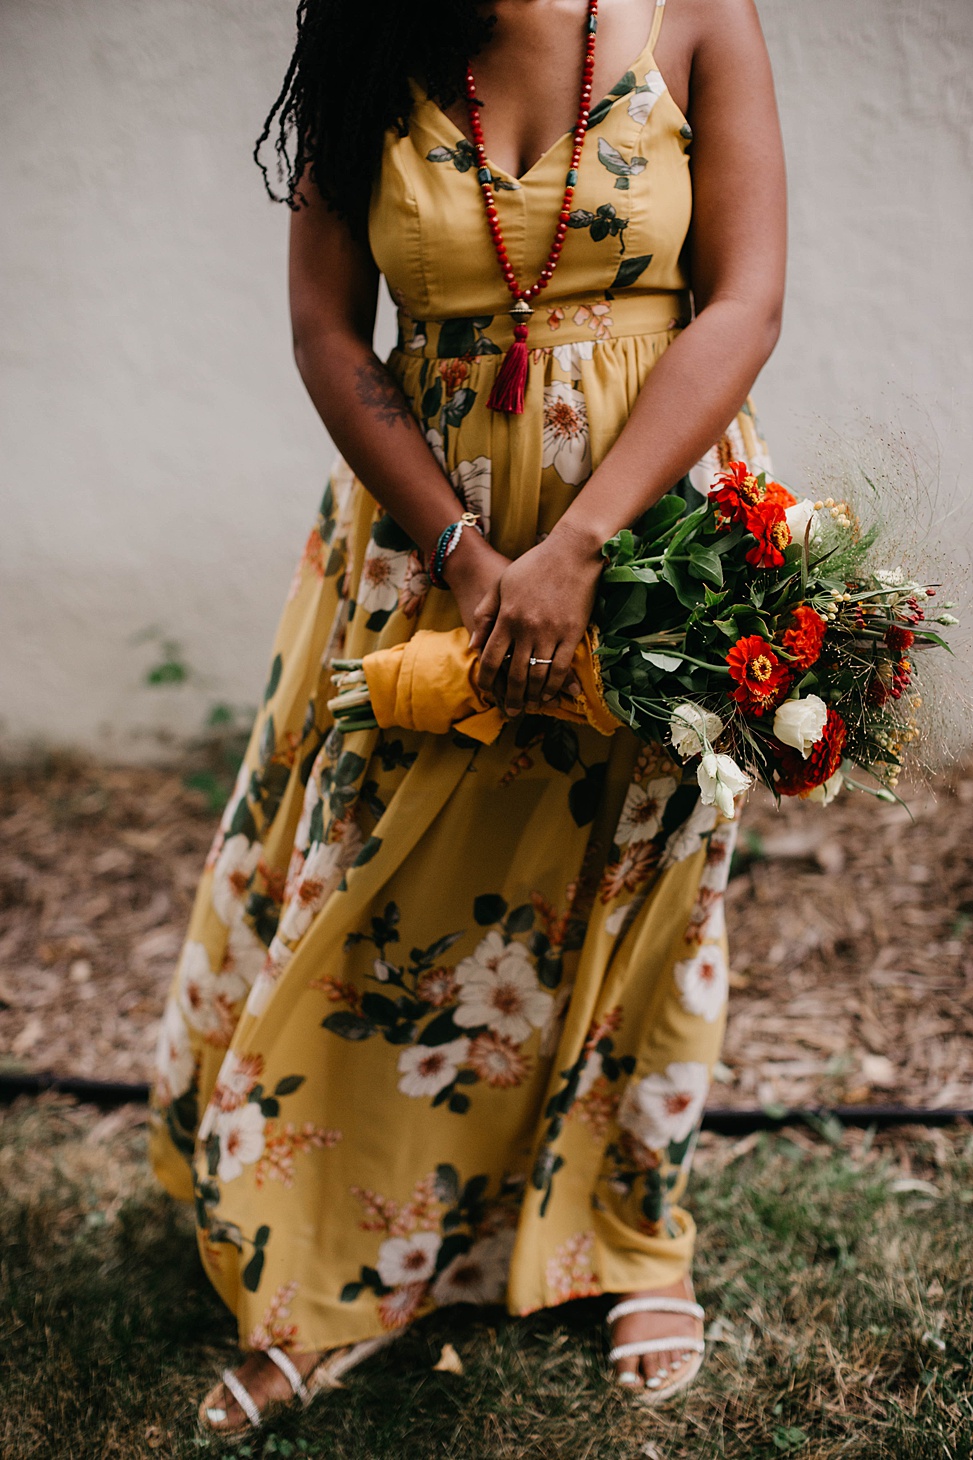 The bride was wearing a yellow floral A line maxi dress, a colorful veil and a necklace